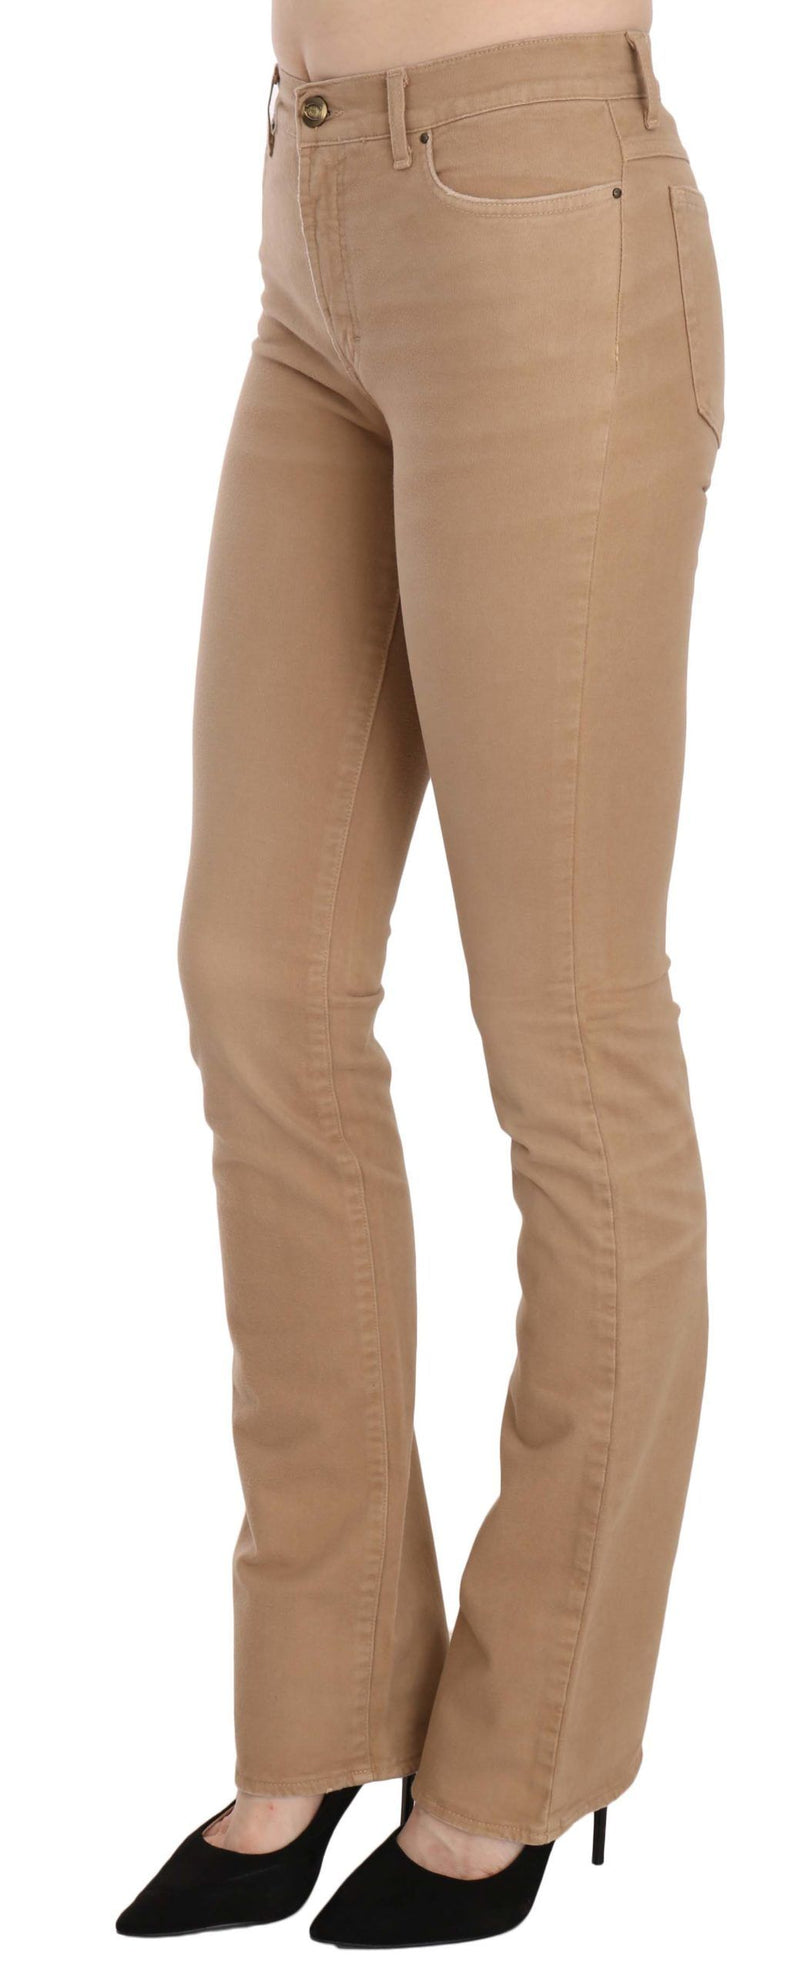 Just Cavalli Brown Cotton Stretch Mid Waist Skinny Trousers Women's Pants